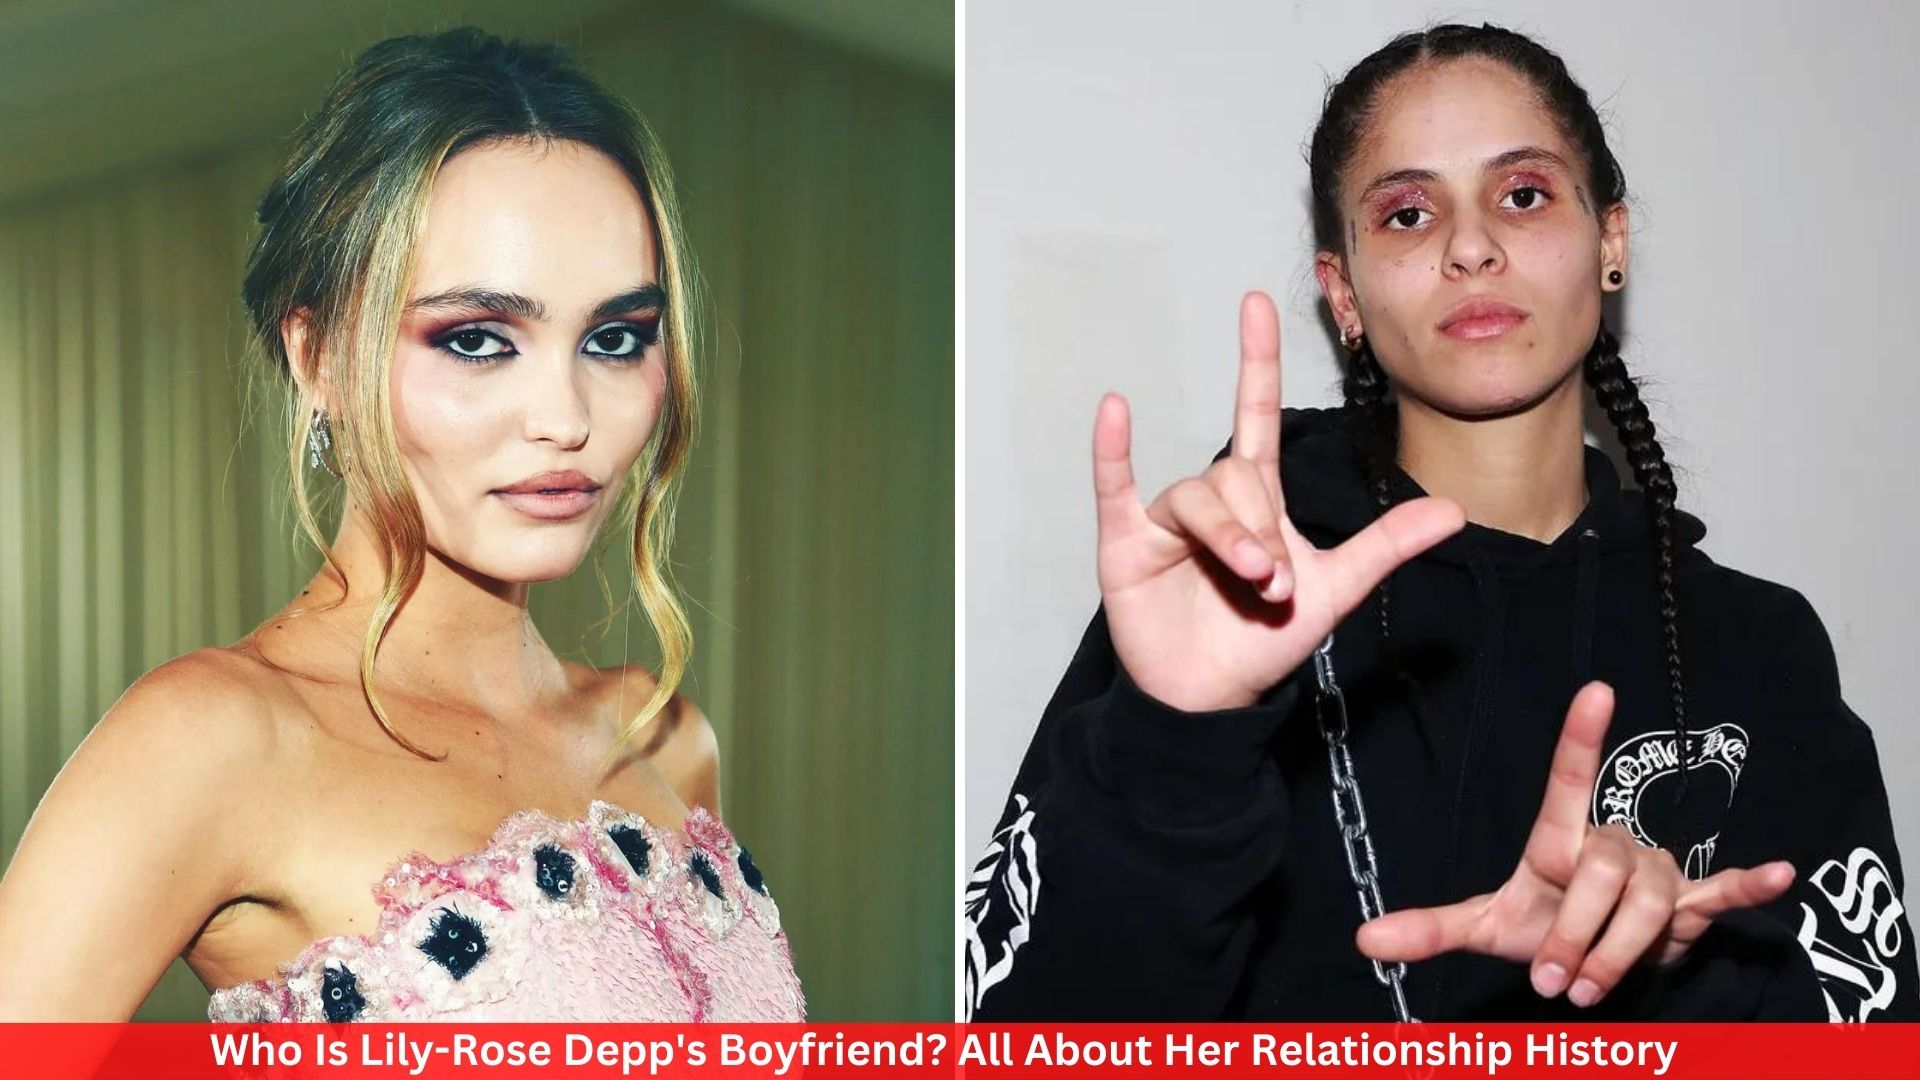 Who Is Lily-Rose Depp's Boyfriend? All About Her Relationship History